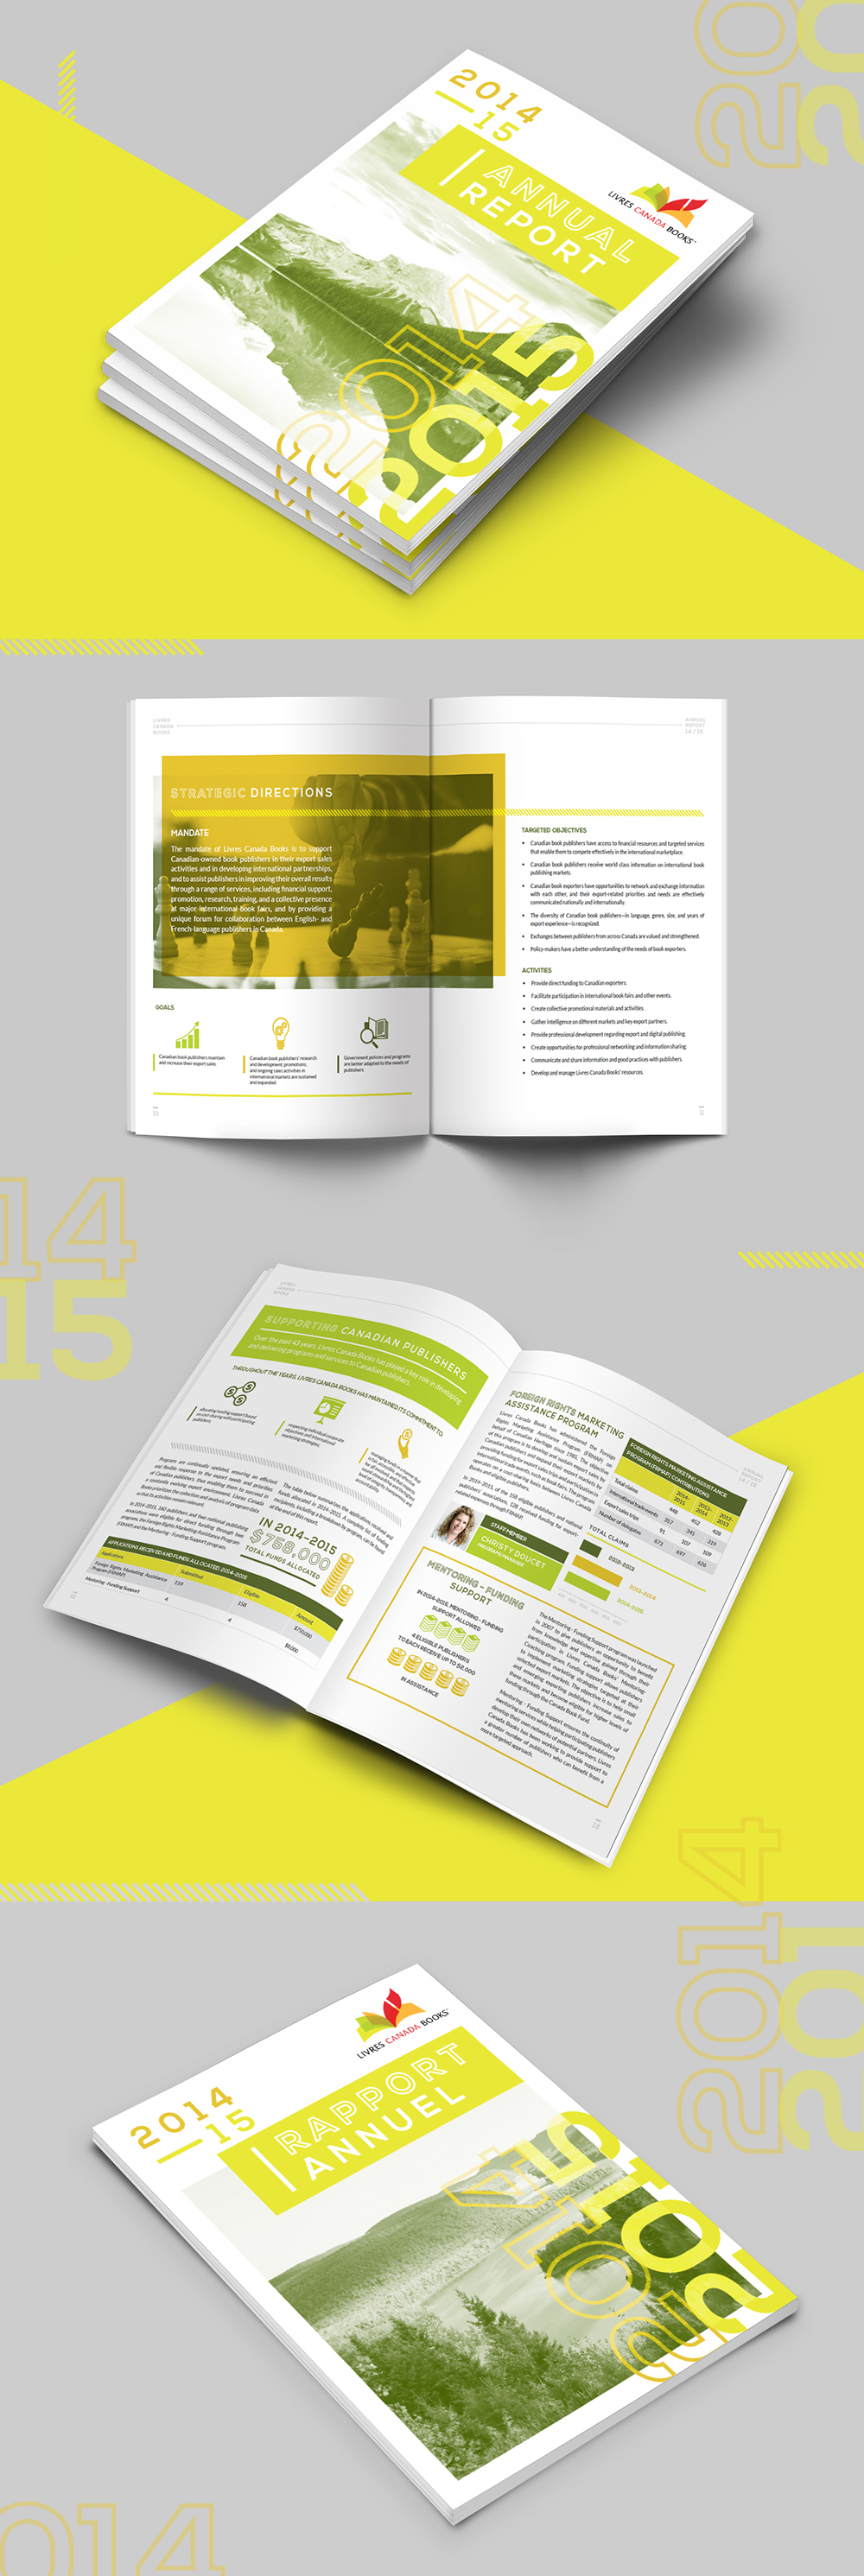 annual report publication magazine report infographic Layout spread book print type Booklet Canada